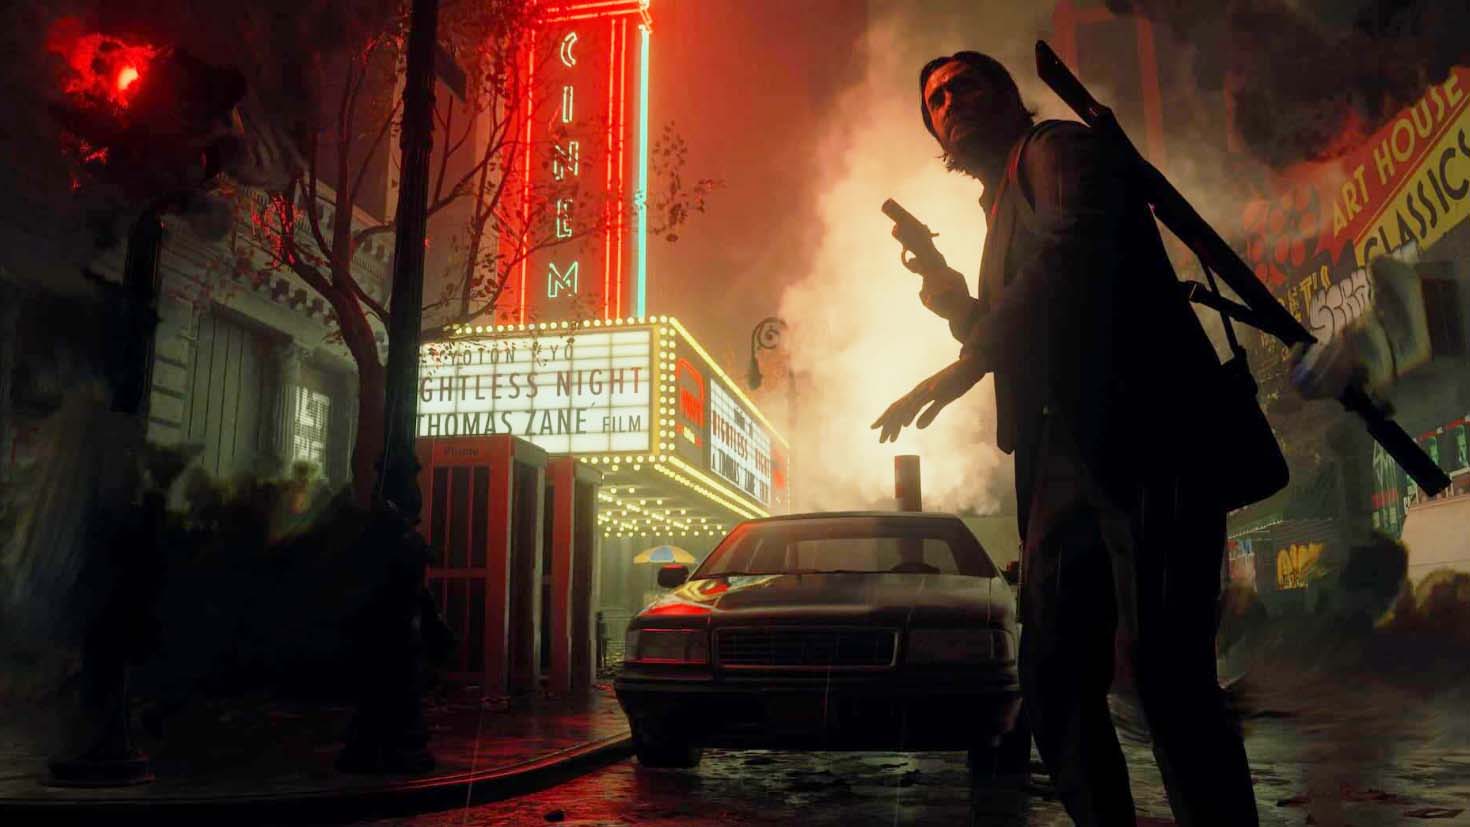 Alan Wake II System Requirements - PC Specs